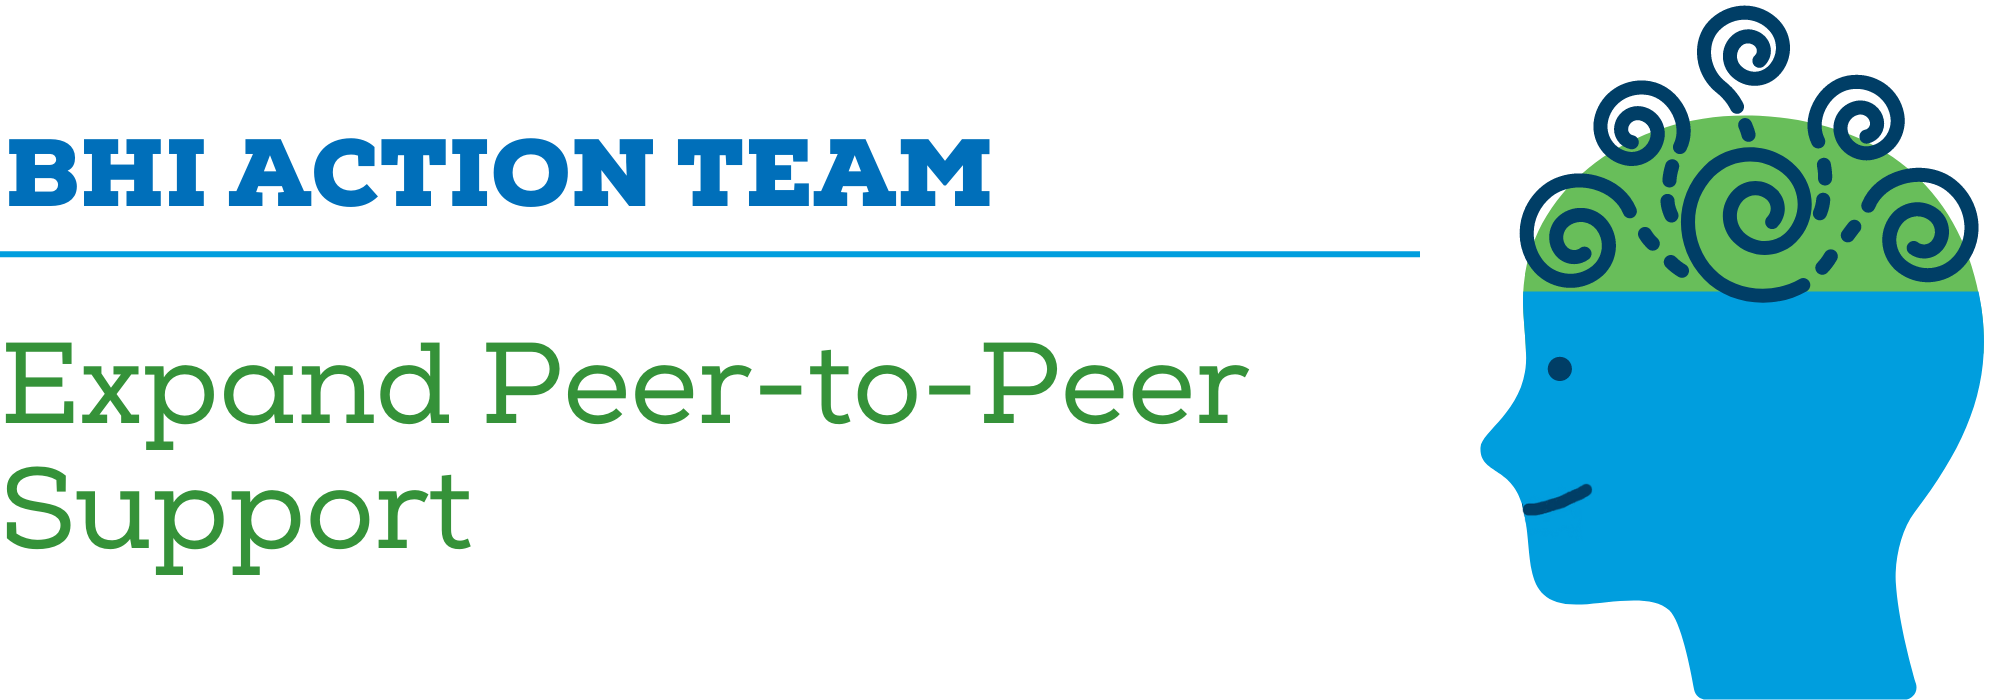 Expand Peer-to-Peer Support